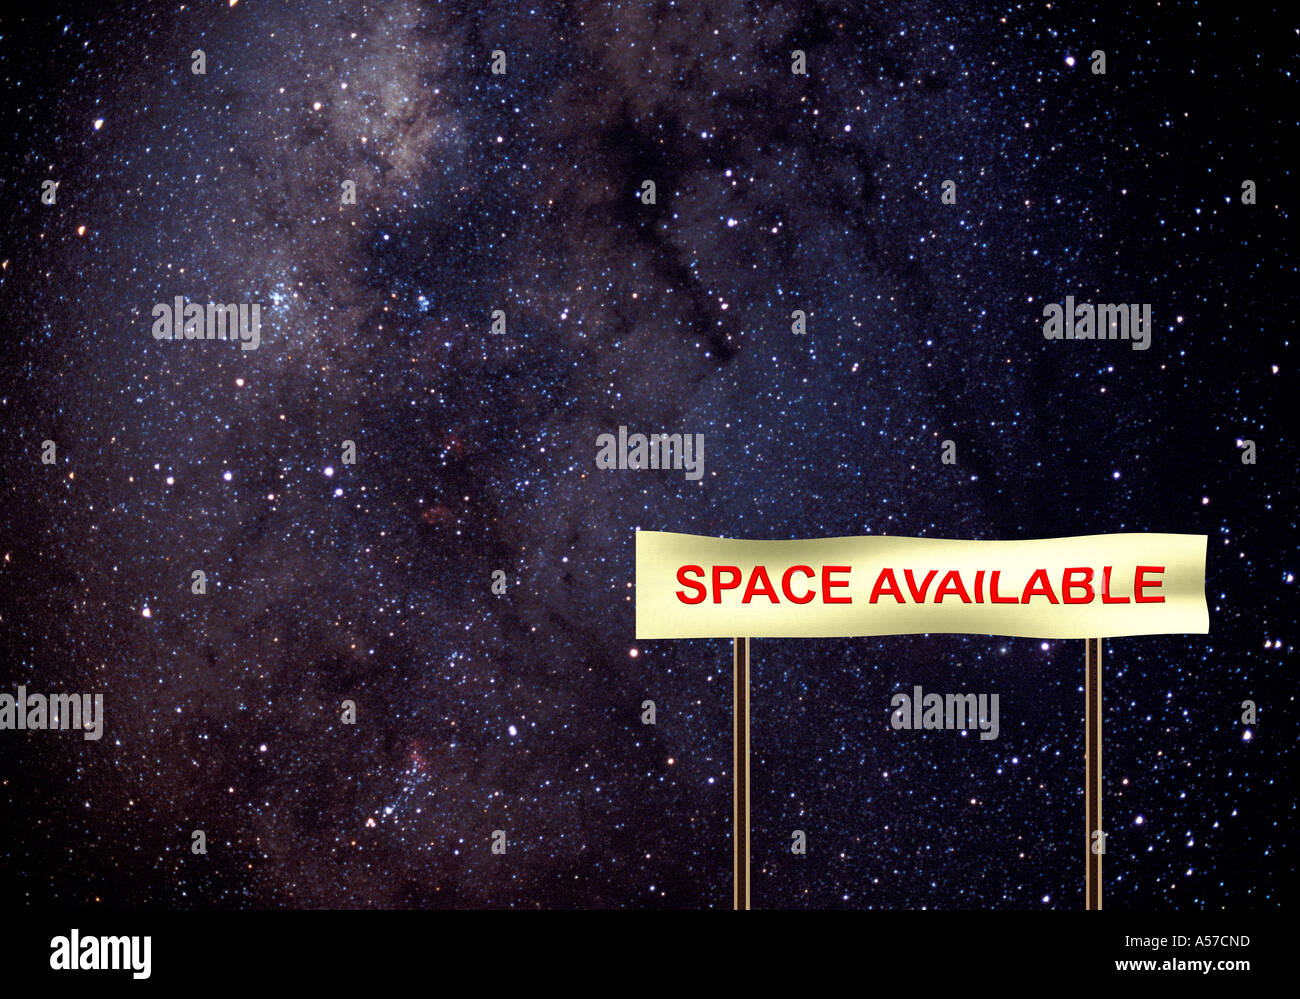 Space Available. Stock Photo